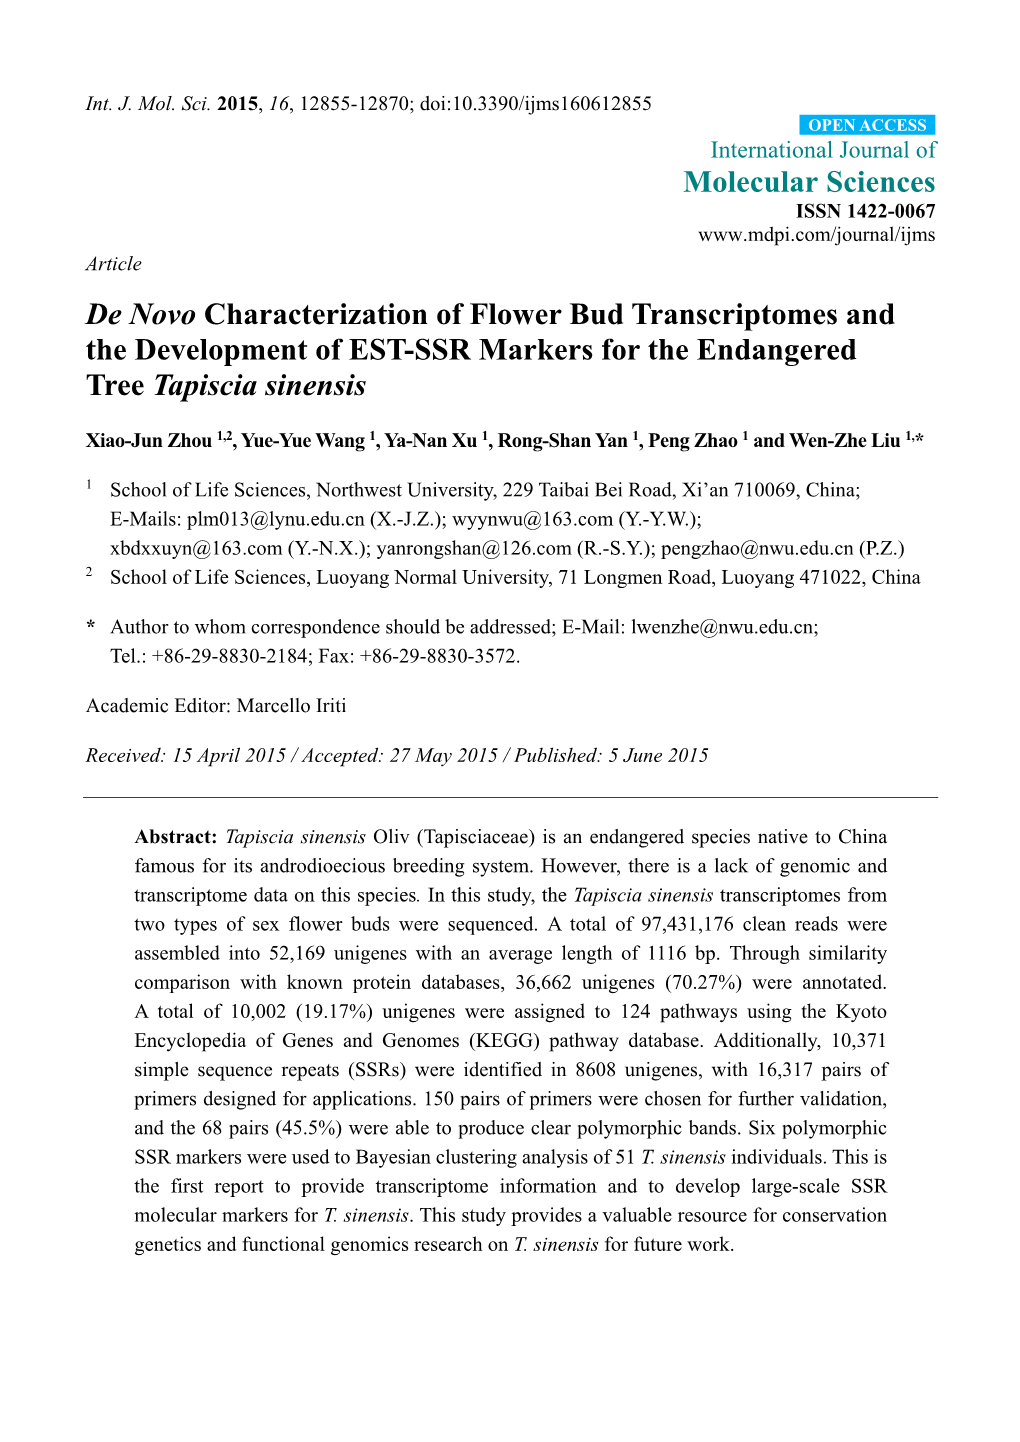 De Novo Characterization of Flower Bud Transcriptomes and the Development of EST-SSR Markers for the Endangered Tree Tapiscia Sinensis